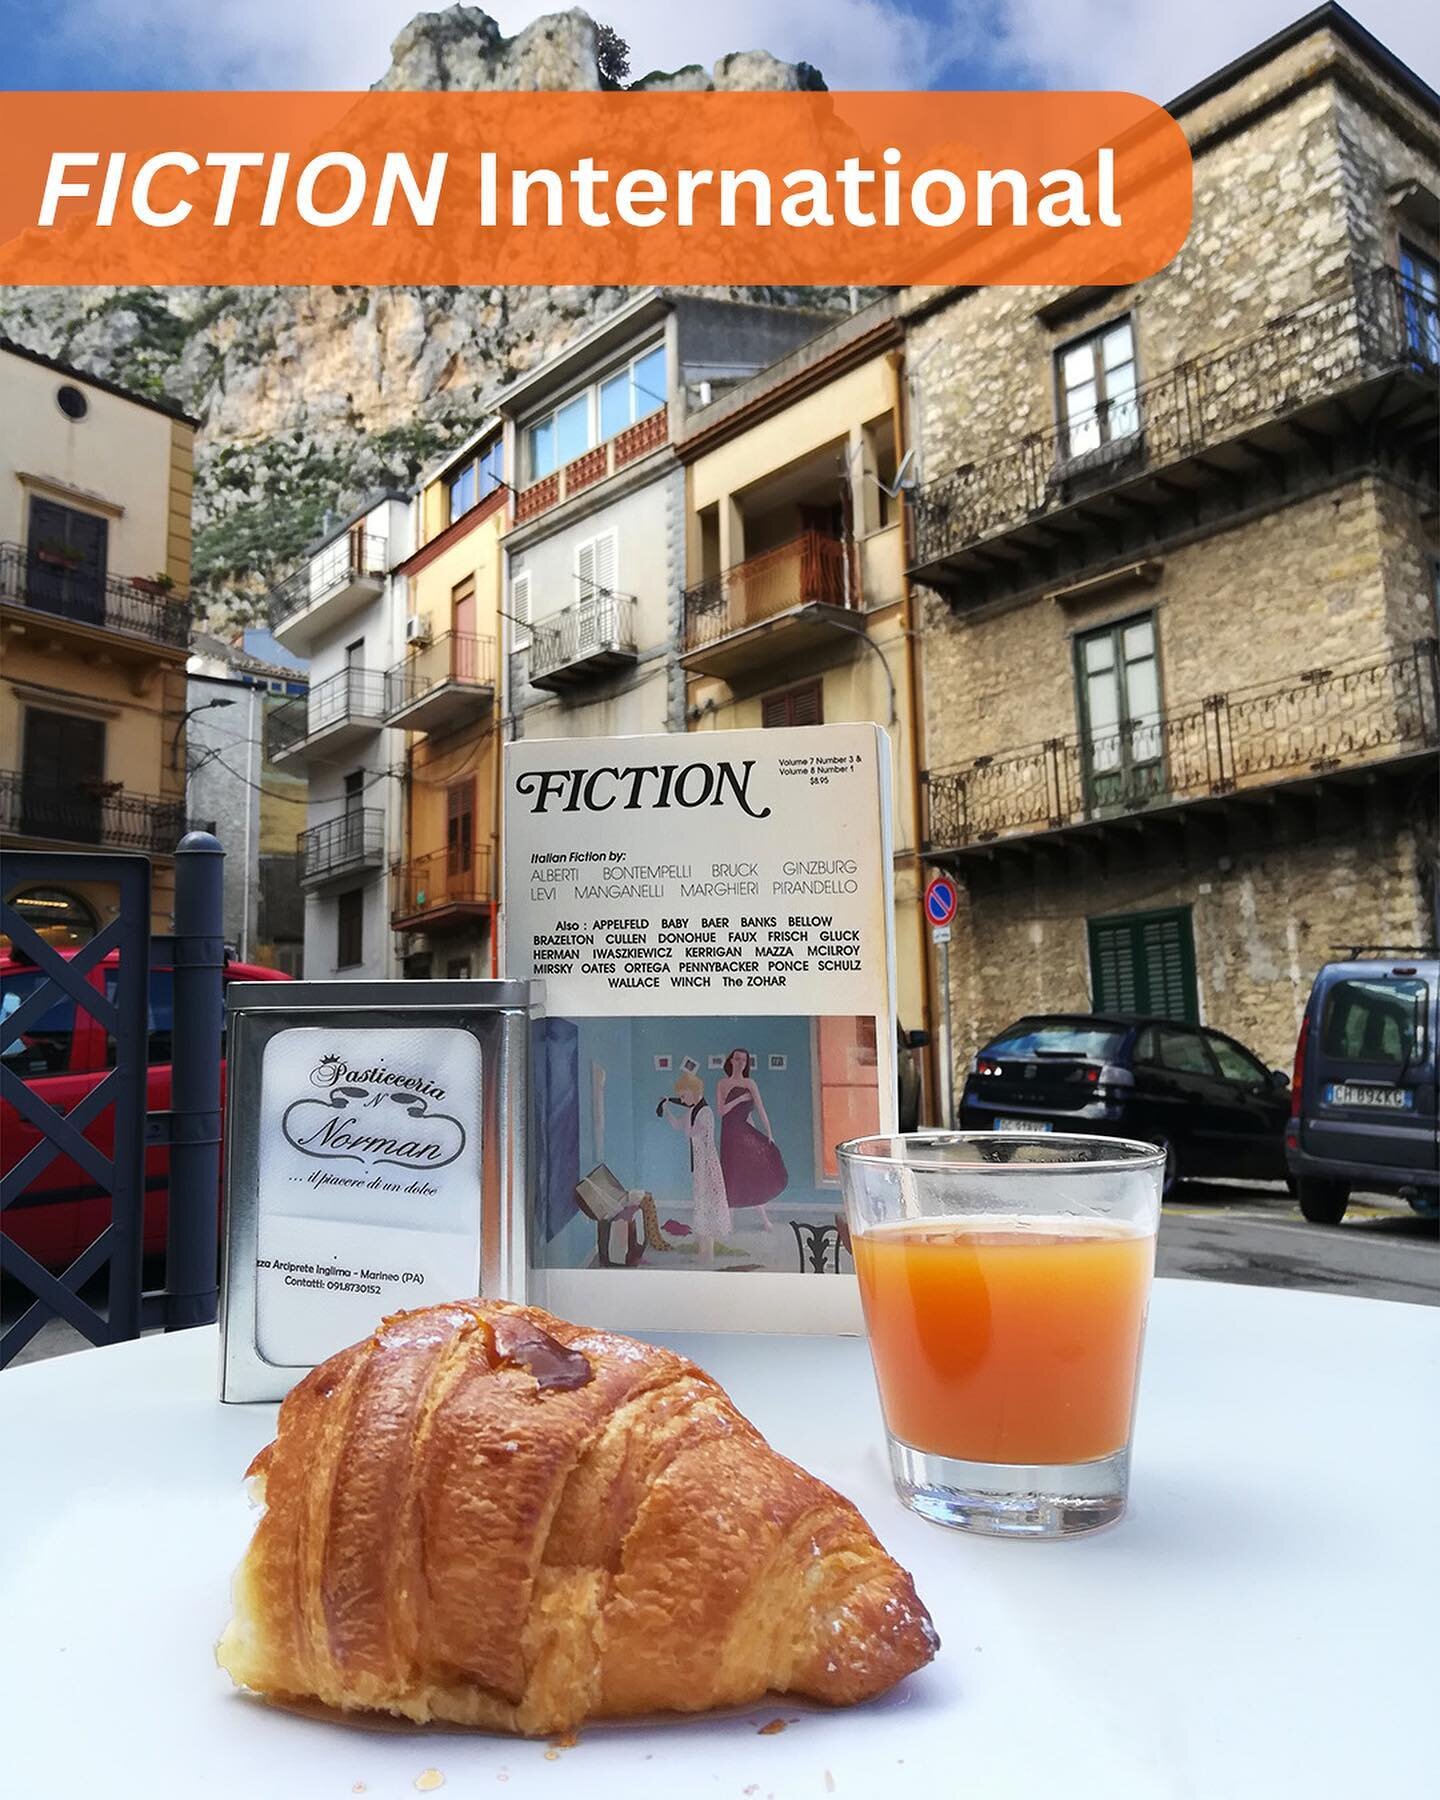 If you happen to find yourself in Marineo, Sicily and want a delicious breakfast, bring along a copy of FICTION&rsquo;s Italian issue and order un succo d&rsquo;arancia e un croissant at @normanshop.spedizioni You won&rsquo;t regret it!
 
Our Italian